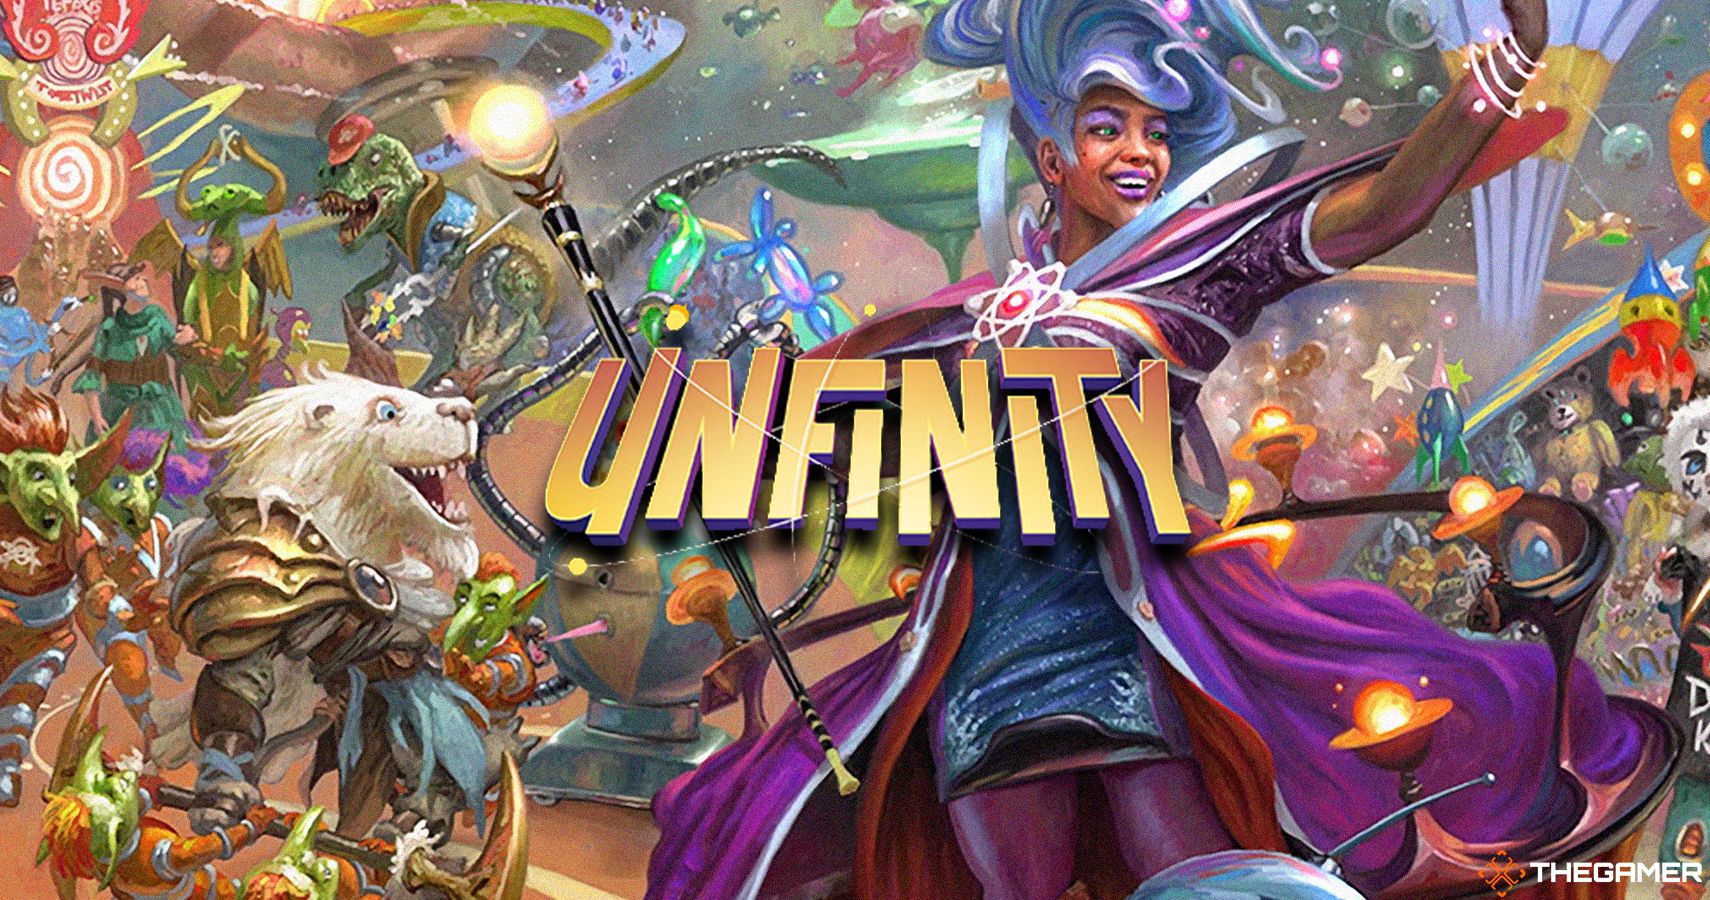 Unfinity, featuring key art by Simon Dominic Brewer